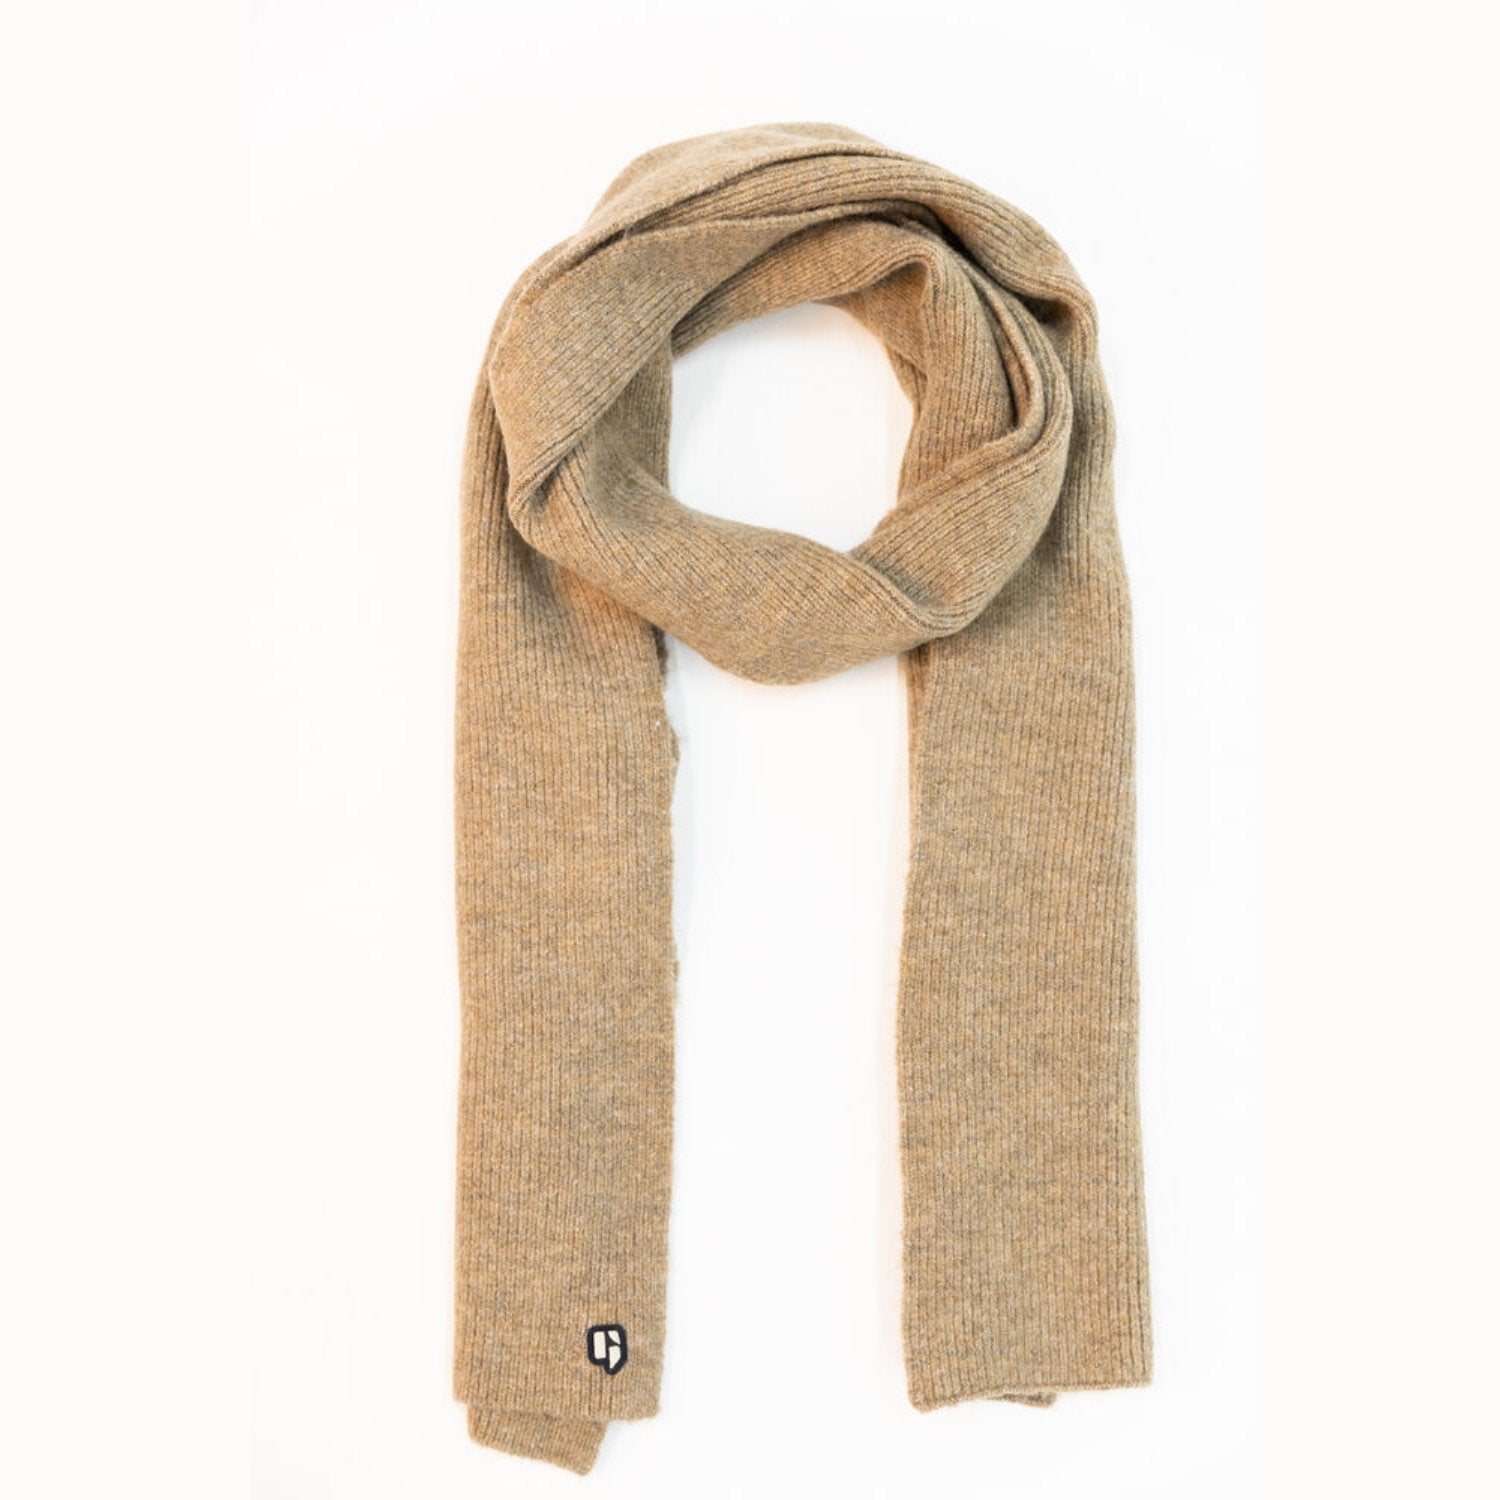 'Garcia I31331 Knitted Scarf' in 'Golden Brown' colour